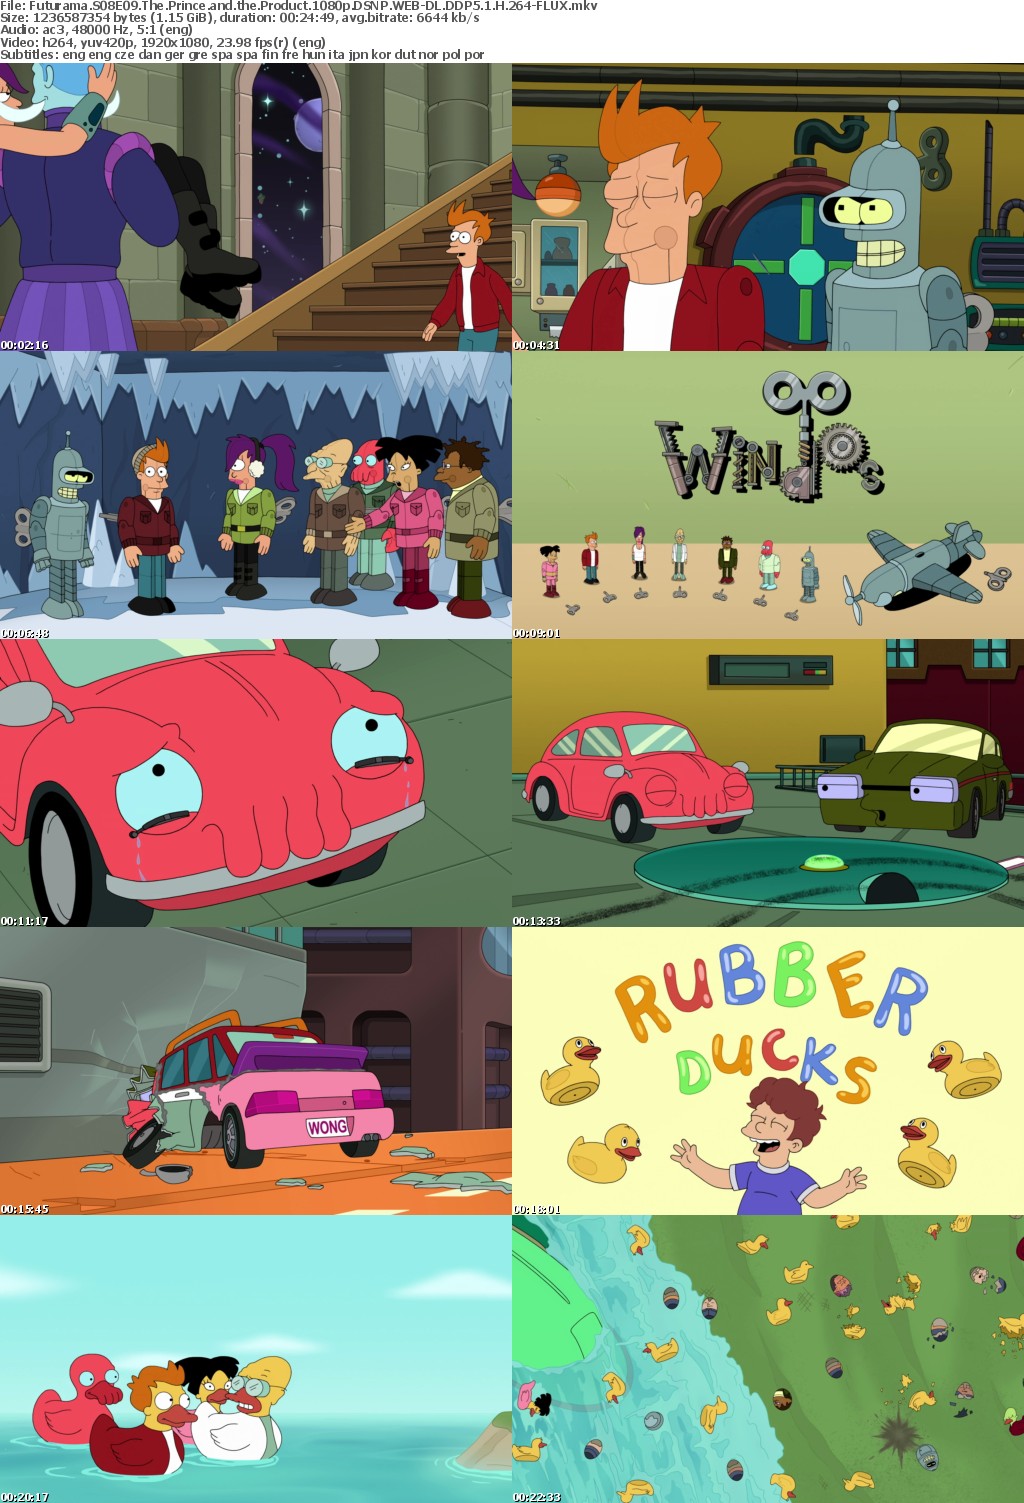 Futurama S08E09 The Prince and the Product 1080p DSNP WEB-DL DDP5 1 H 264-FLUX